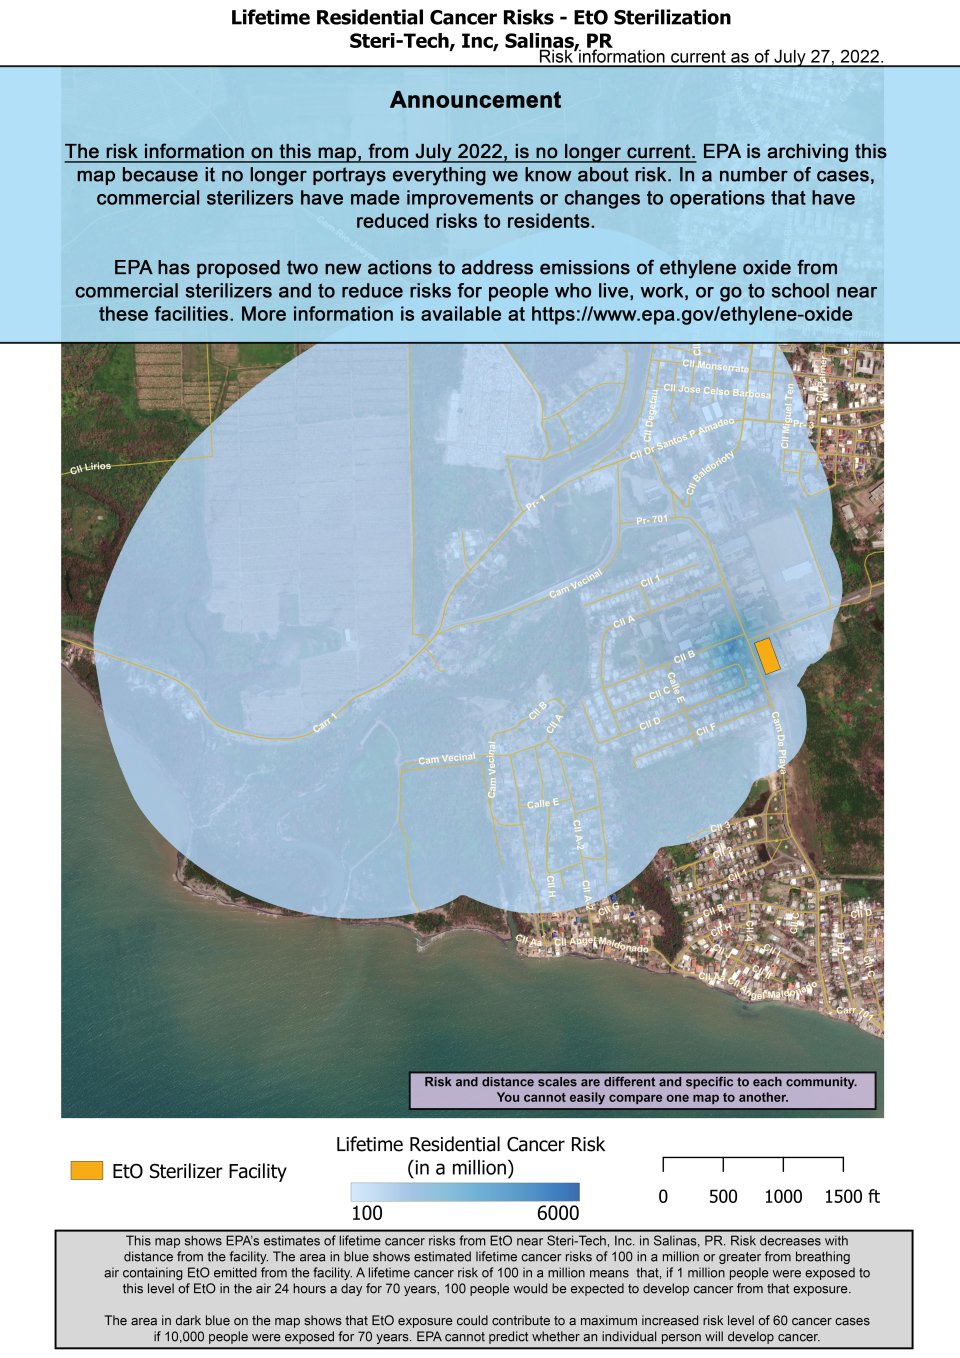 This map shows EPA’s estimate of lifetime cancer risks from breathing ethylene oxide near Steri-Tech located at Carretera 701 Km 0.7 Salinas Industrial Park in Salinas, PR.  Estimated cancer risk decreases with distance from the facility.  Nearest the facility, the estimated lifetime cancer risk is 6,000 in a million. This drops to 100 in a million and extends near Salinas Municipal Cemetery to the northwest, Los Ochenta Beach to the west, and Villa Esperanza Residential Development to the southwest. 